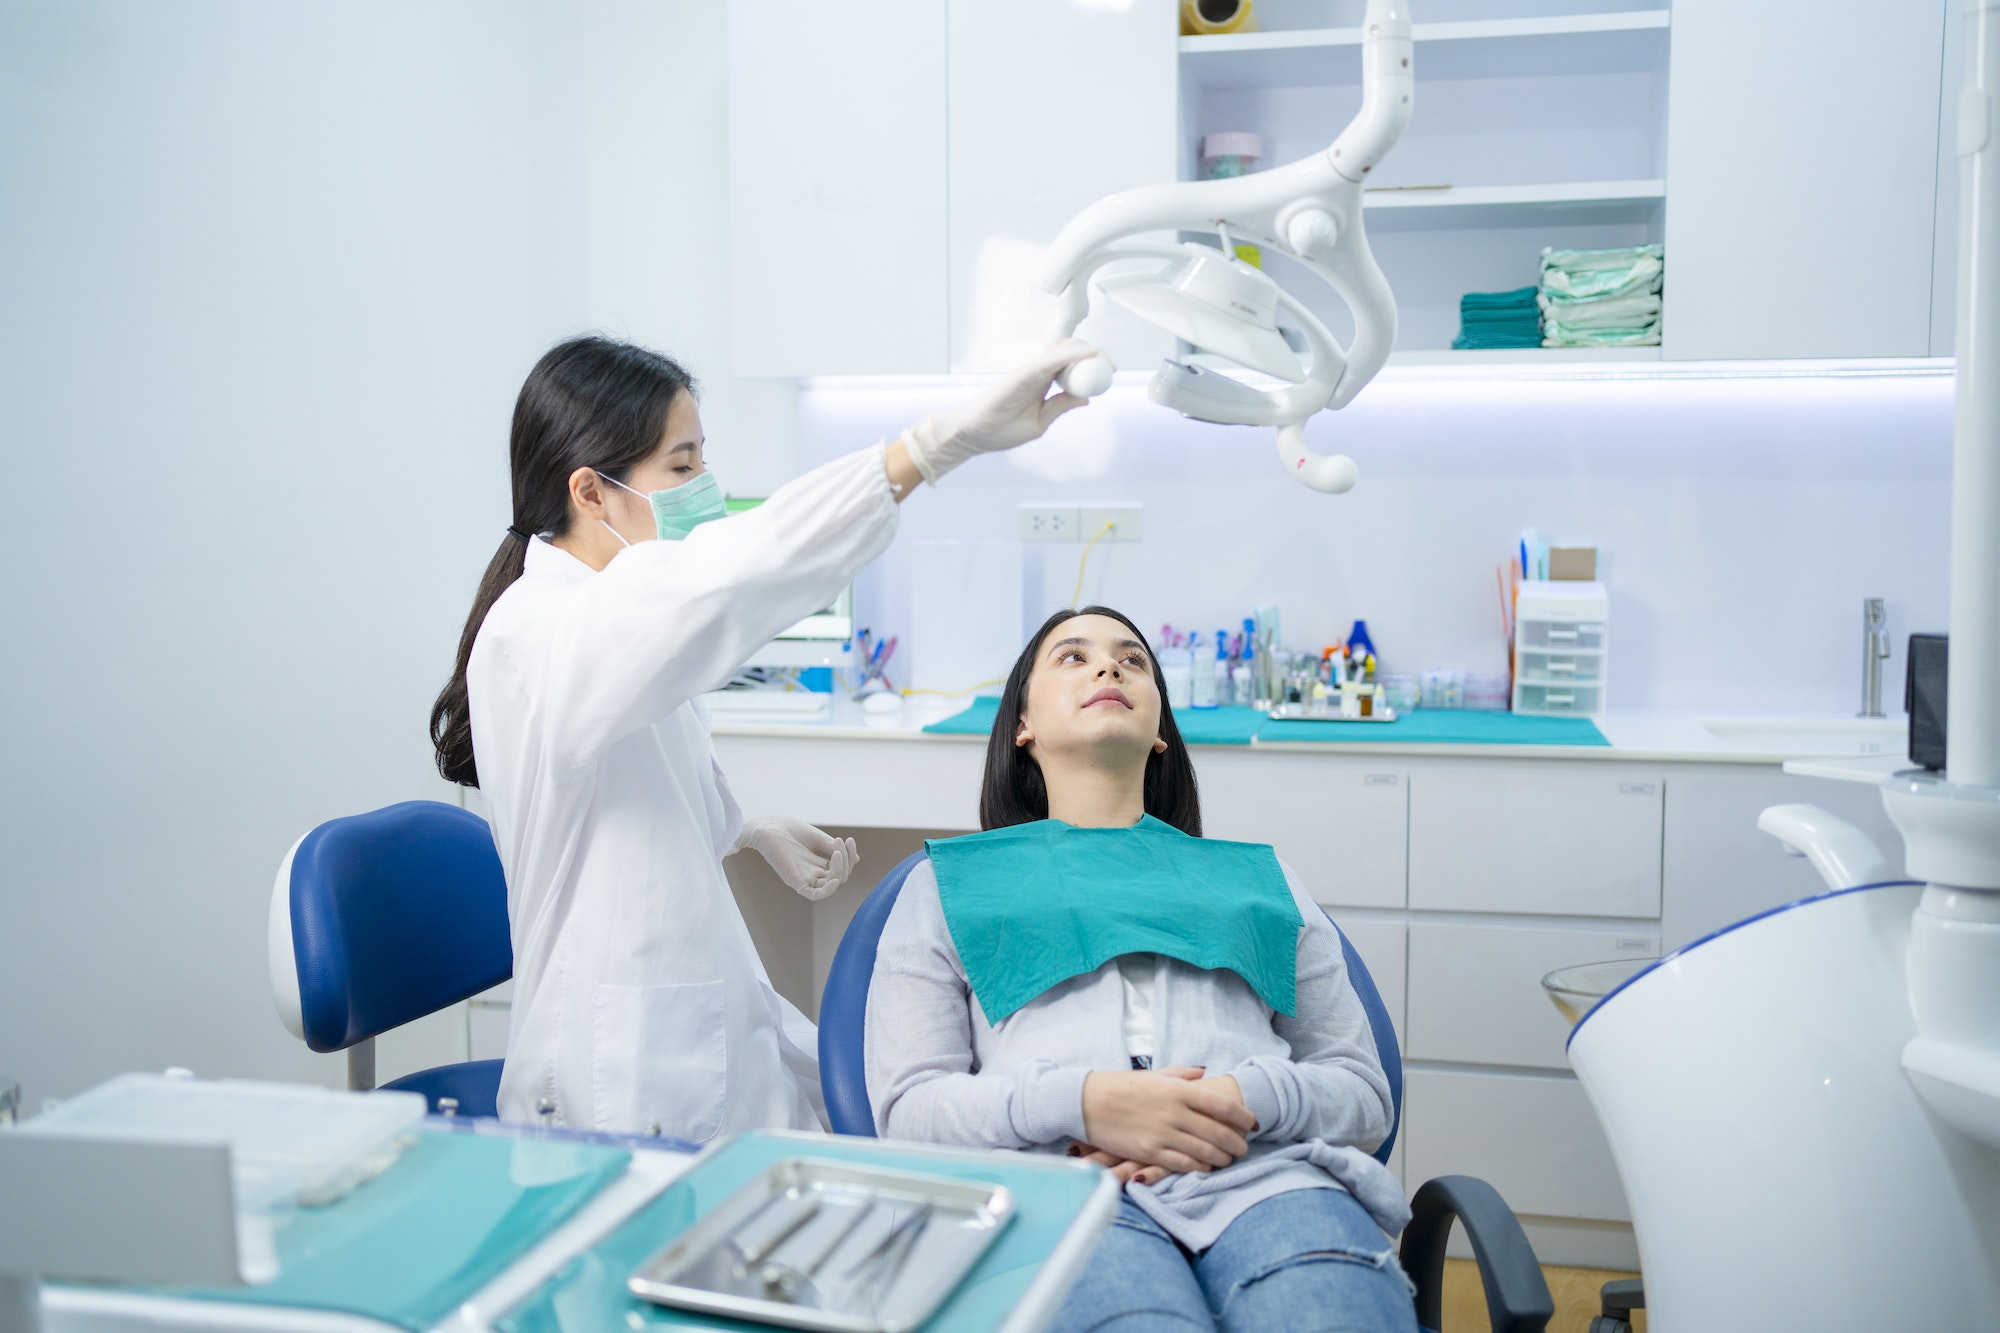 Asian female dentist adjust dental surgical light then start checking or examining tooth of patient